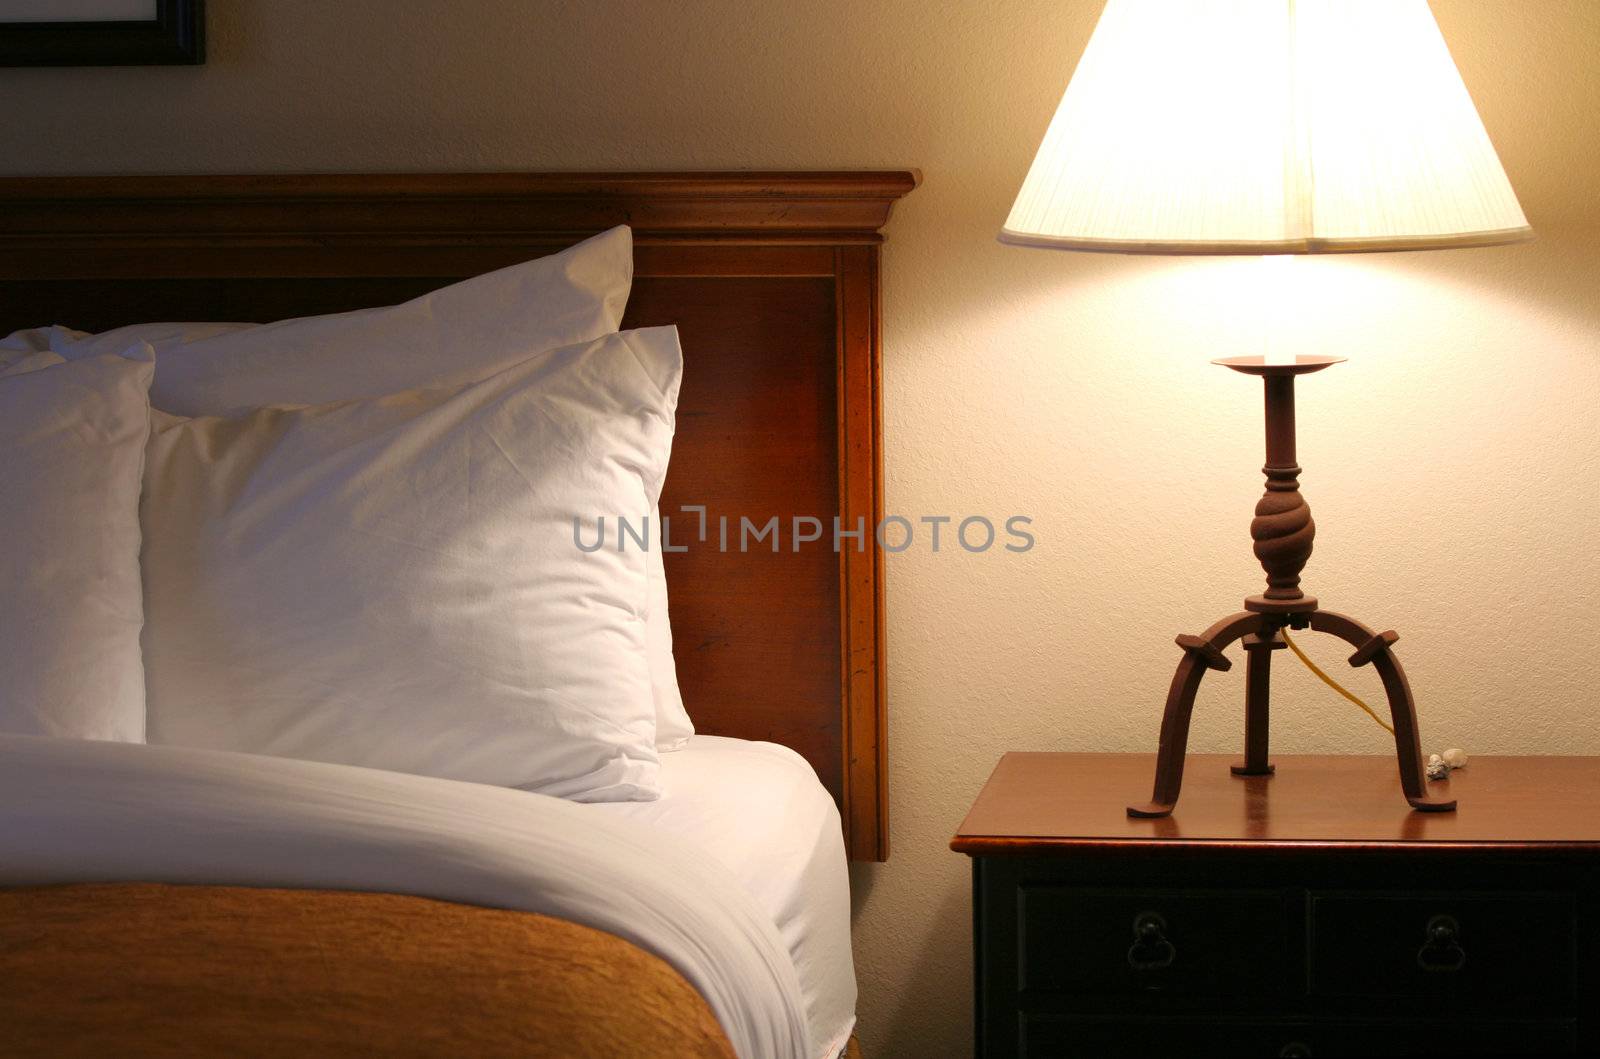 Comfortable, relaxing bed with lamp on side table by jarenwicklund